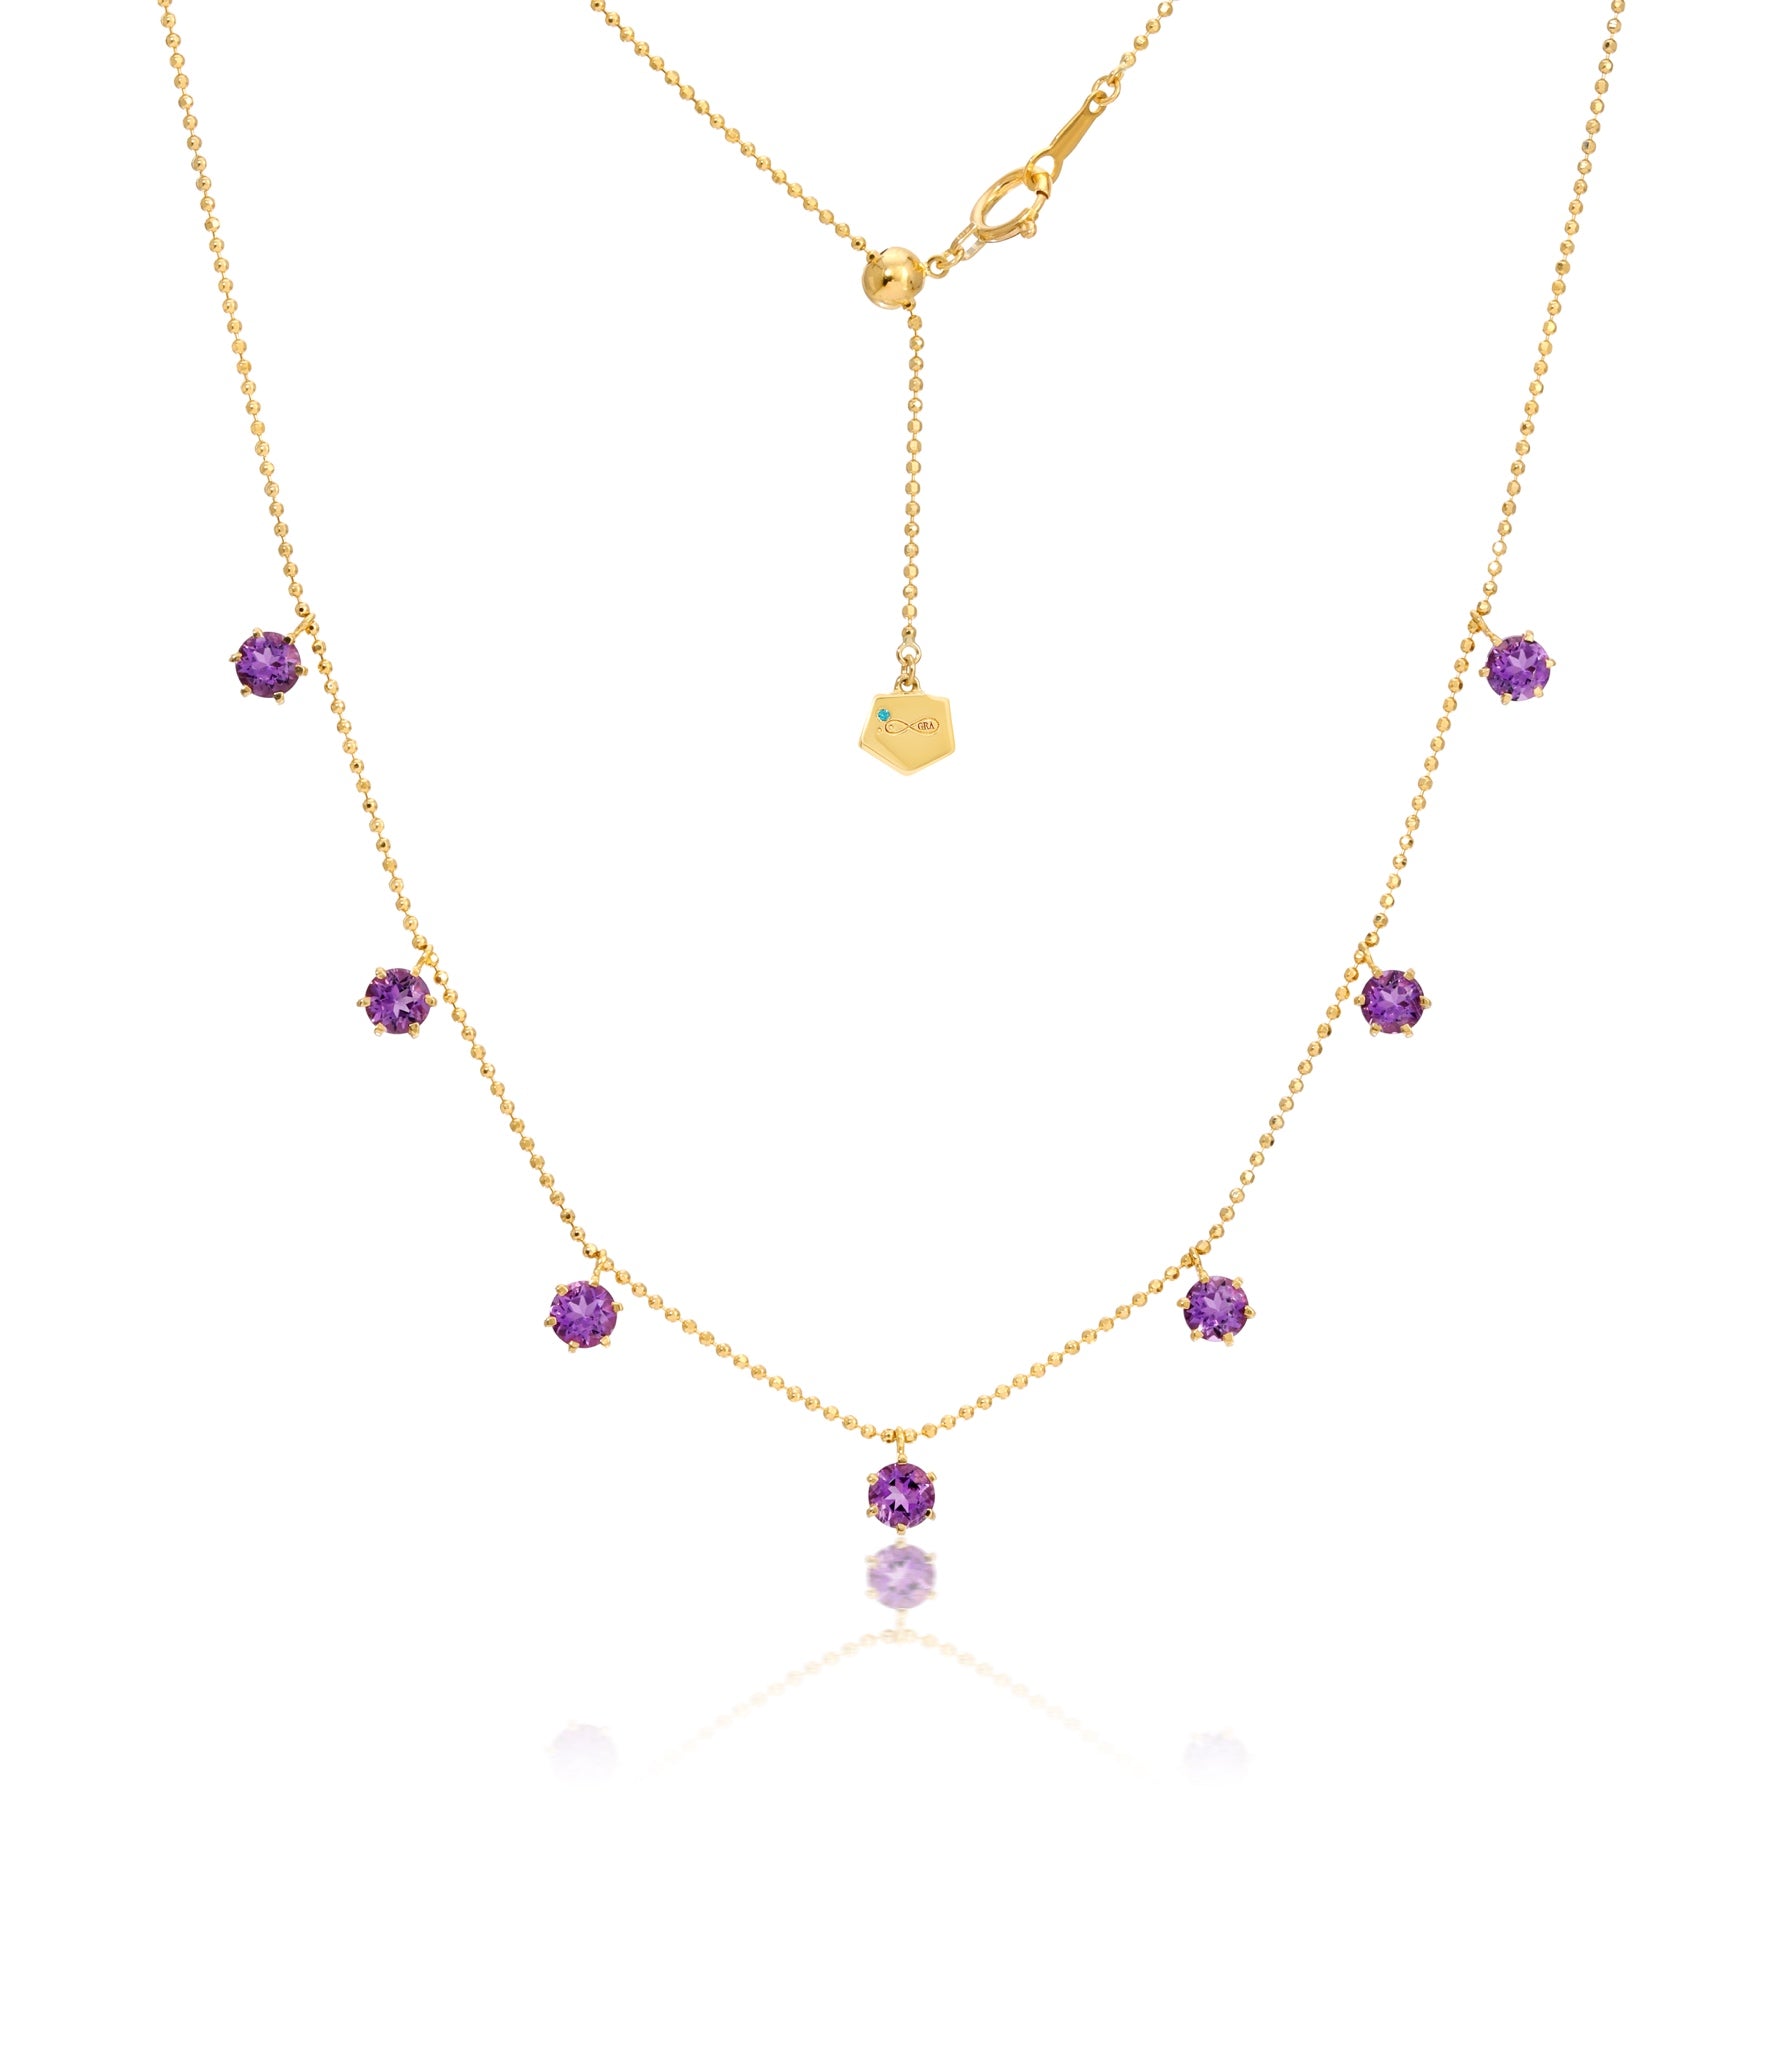 2ct Amethyst Floating Necklace